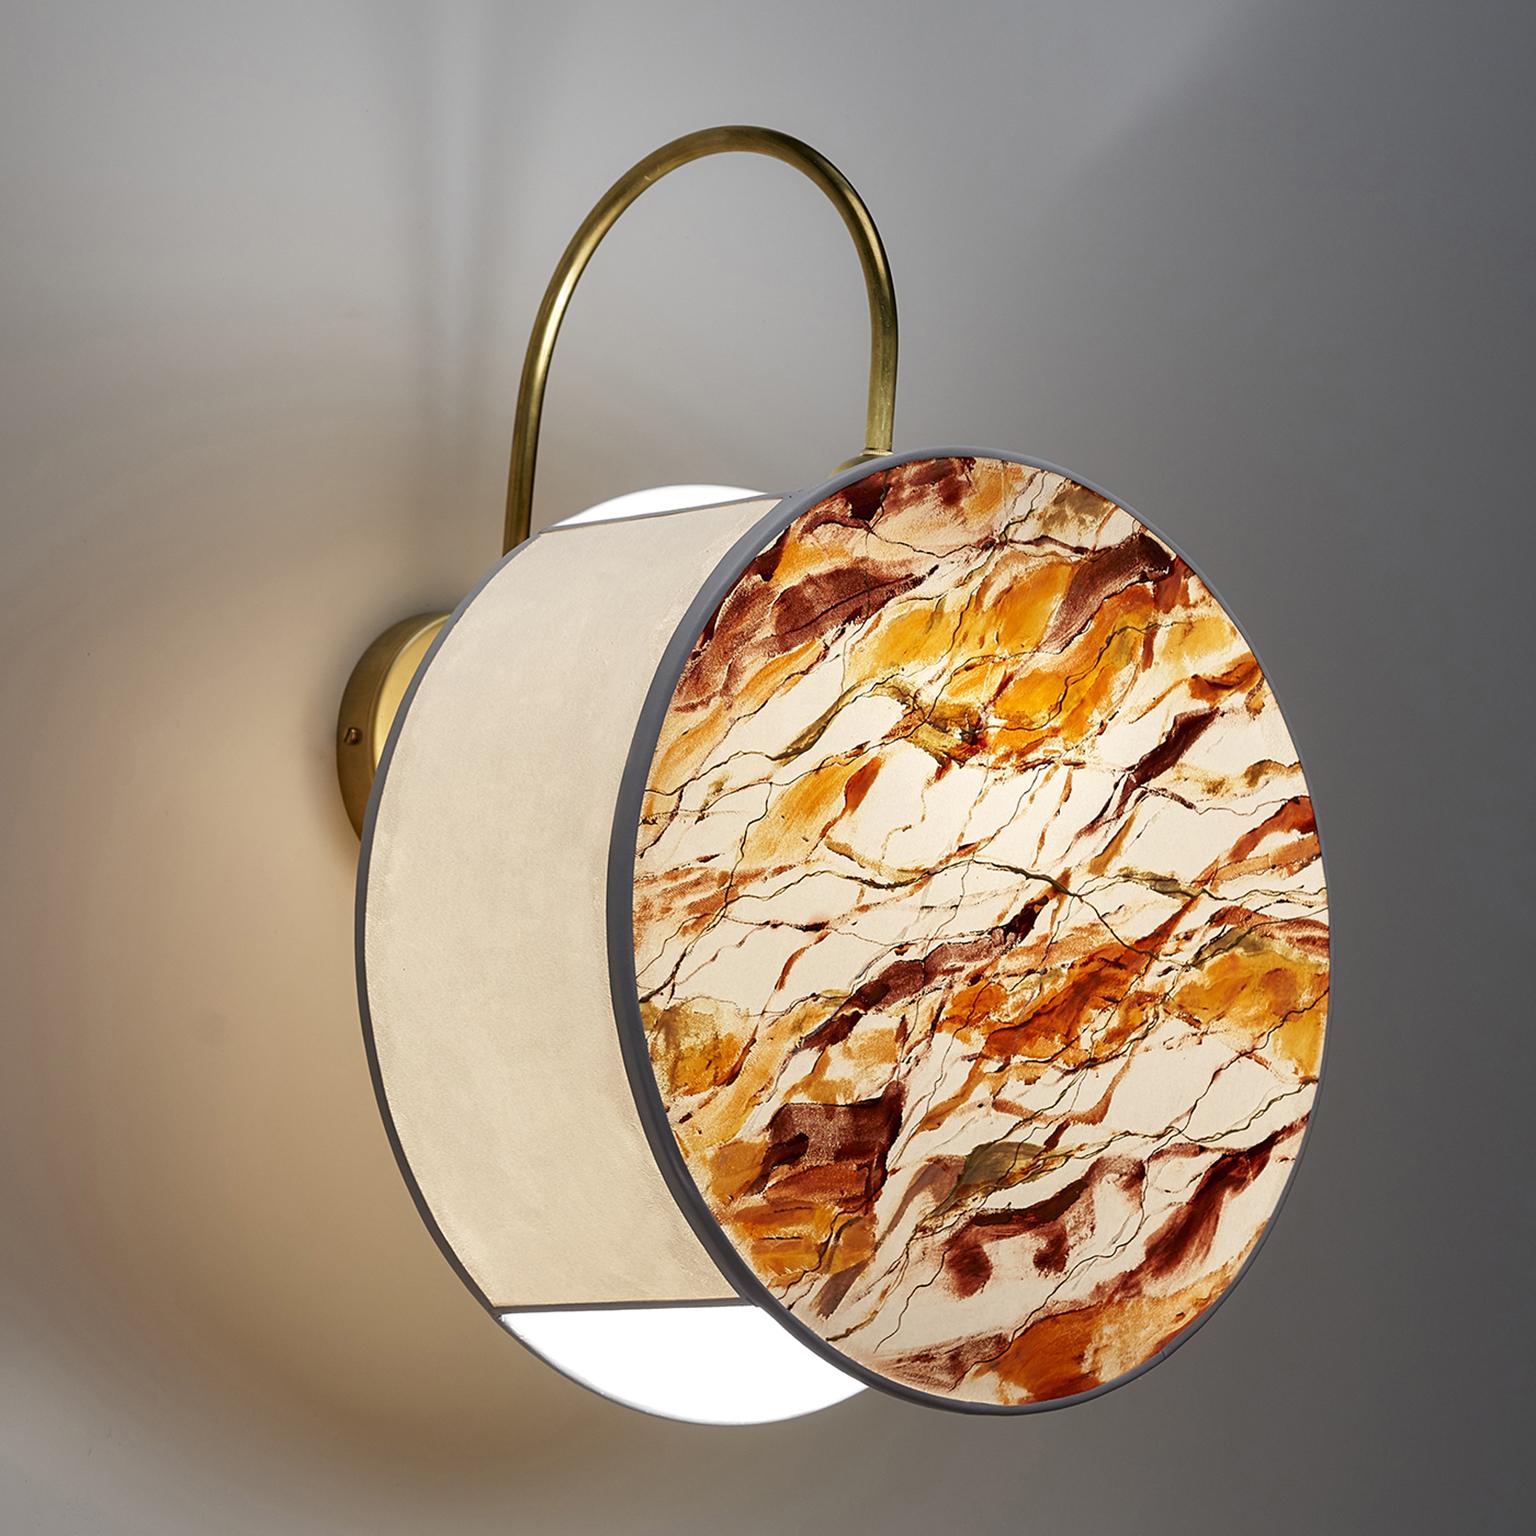 Mandarin Pattern Sconce Lamps Handmade Painting Velvet Natural Brass In New Condition For Sale In Campolongo Maggiore, IT